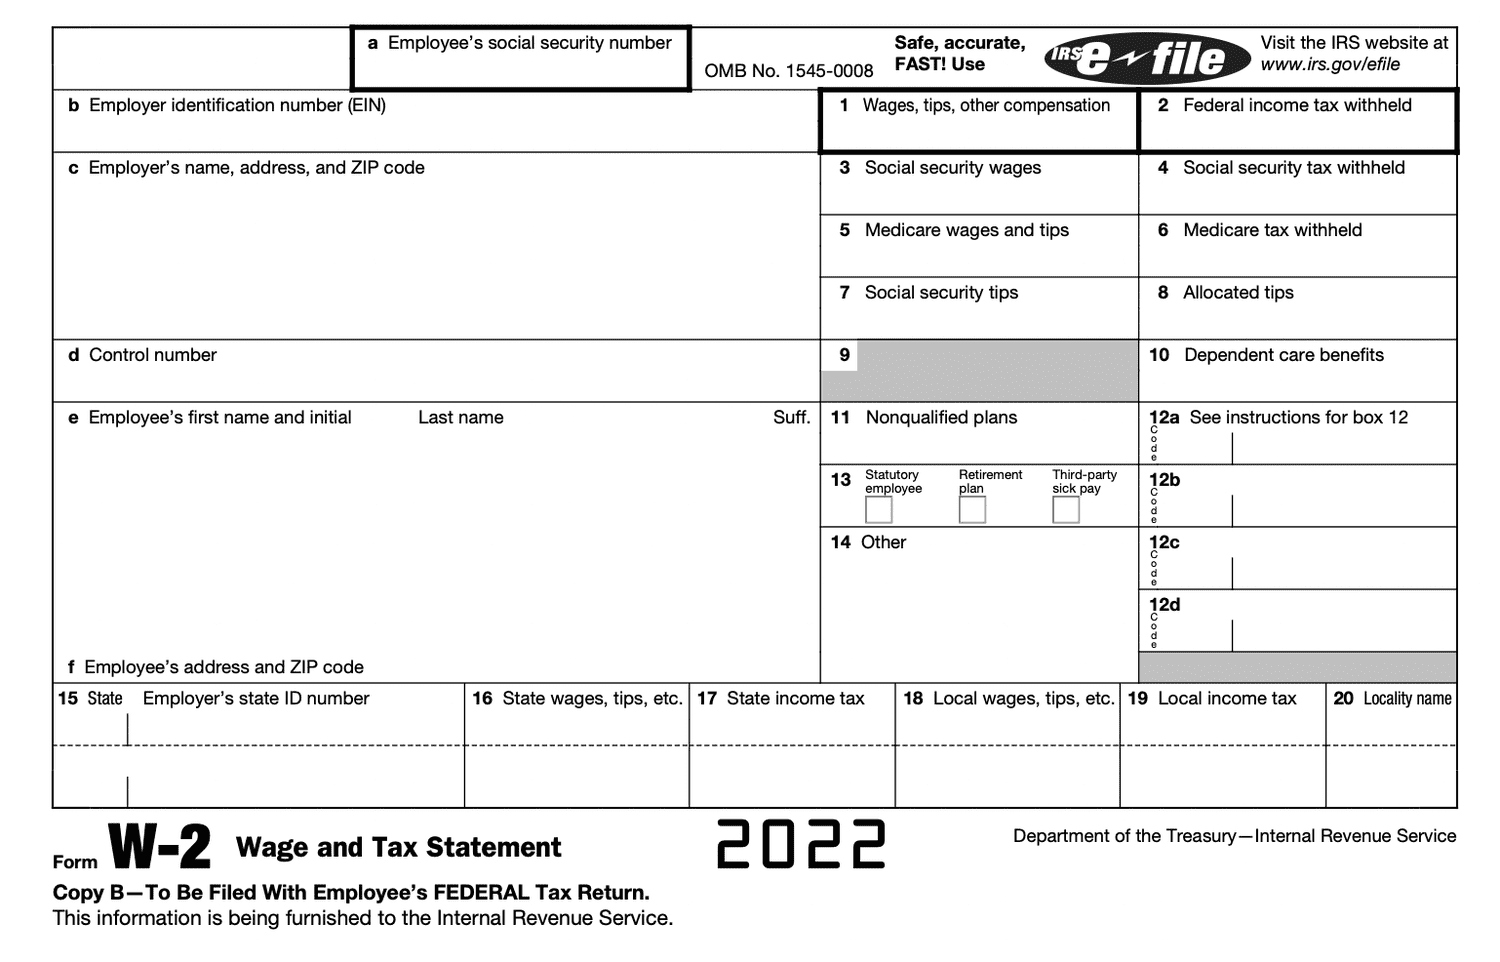 Form W-2 Wage And Tax Statement: What It Is And How To Read It with regard to W2 Form Image